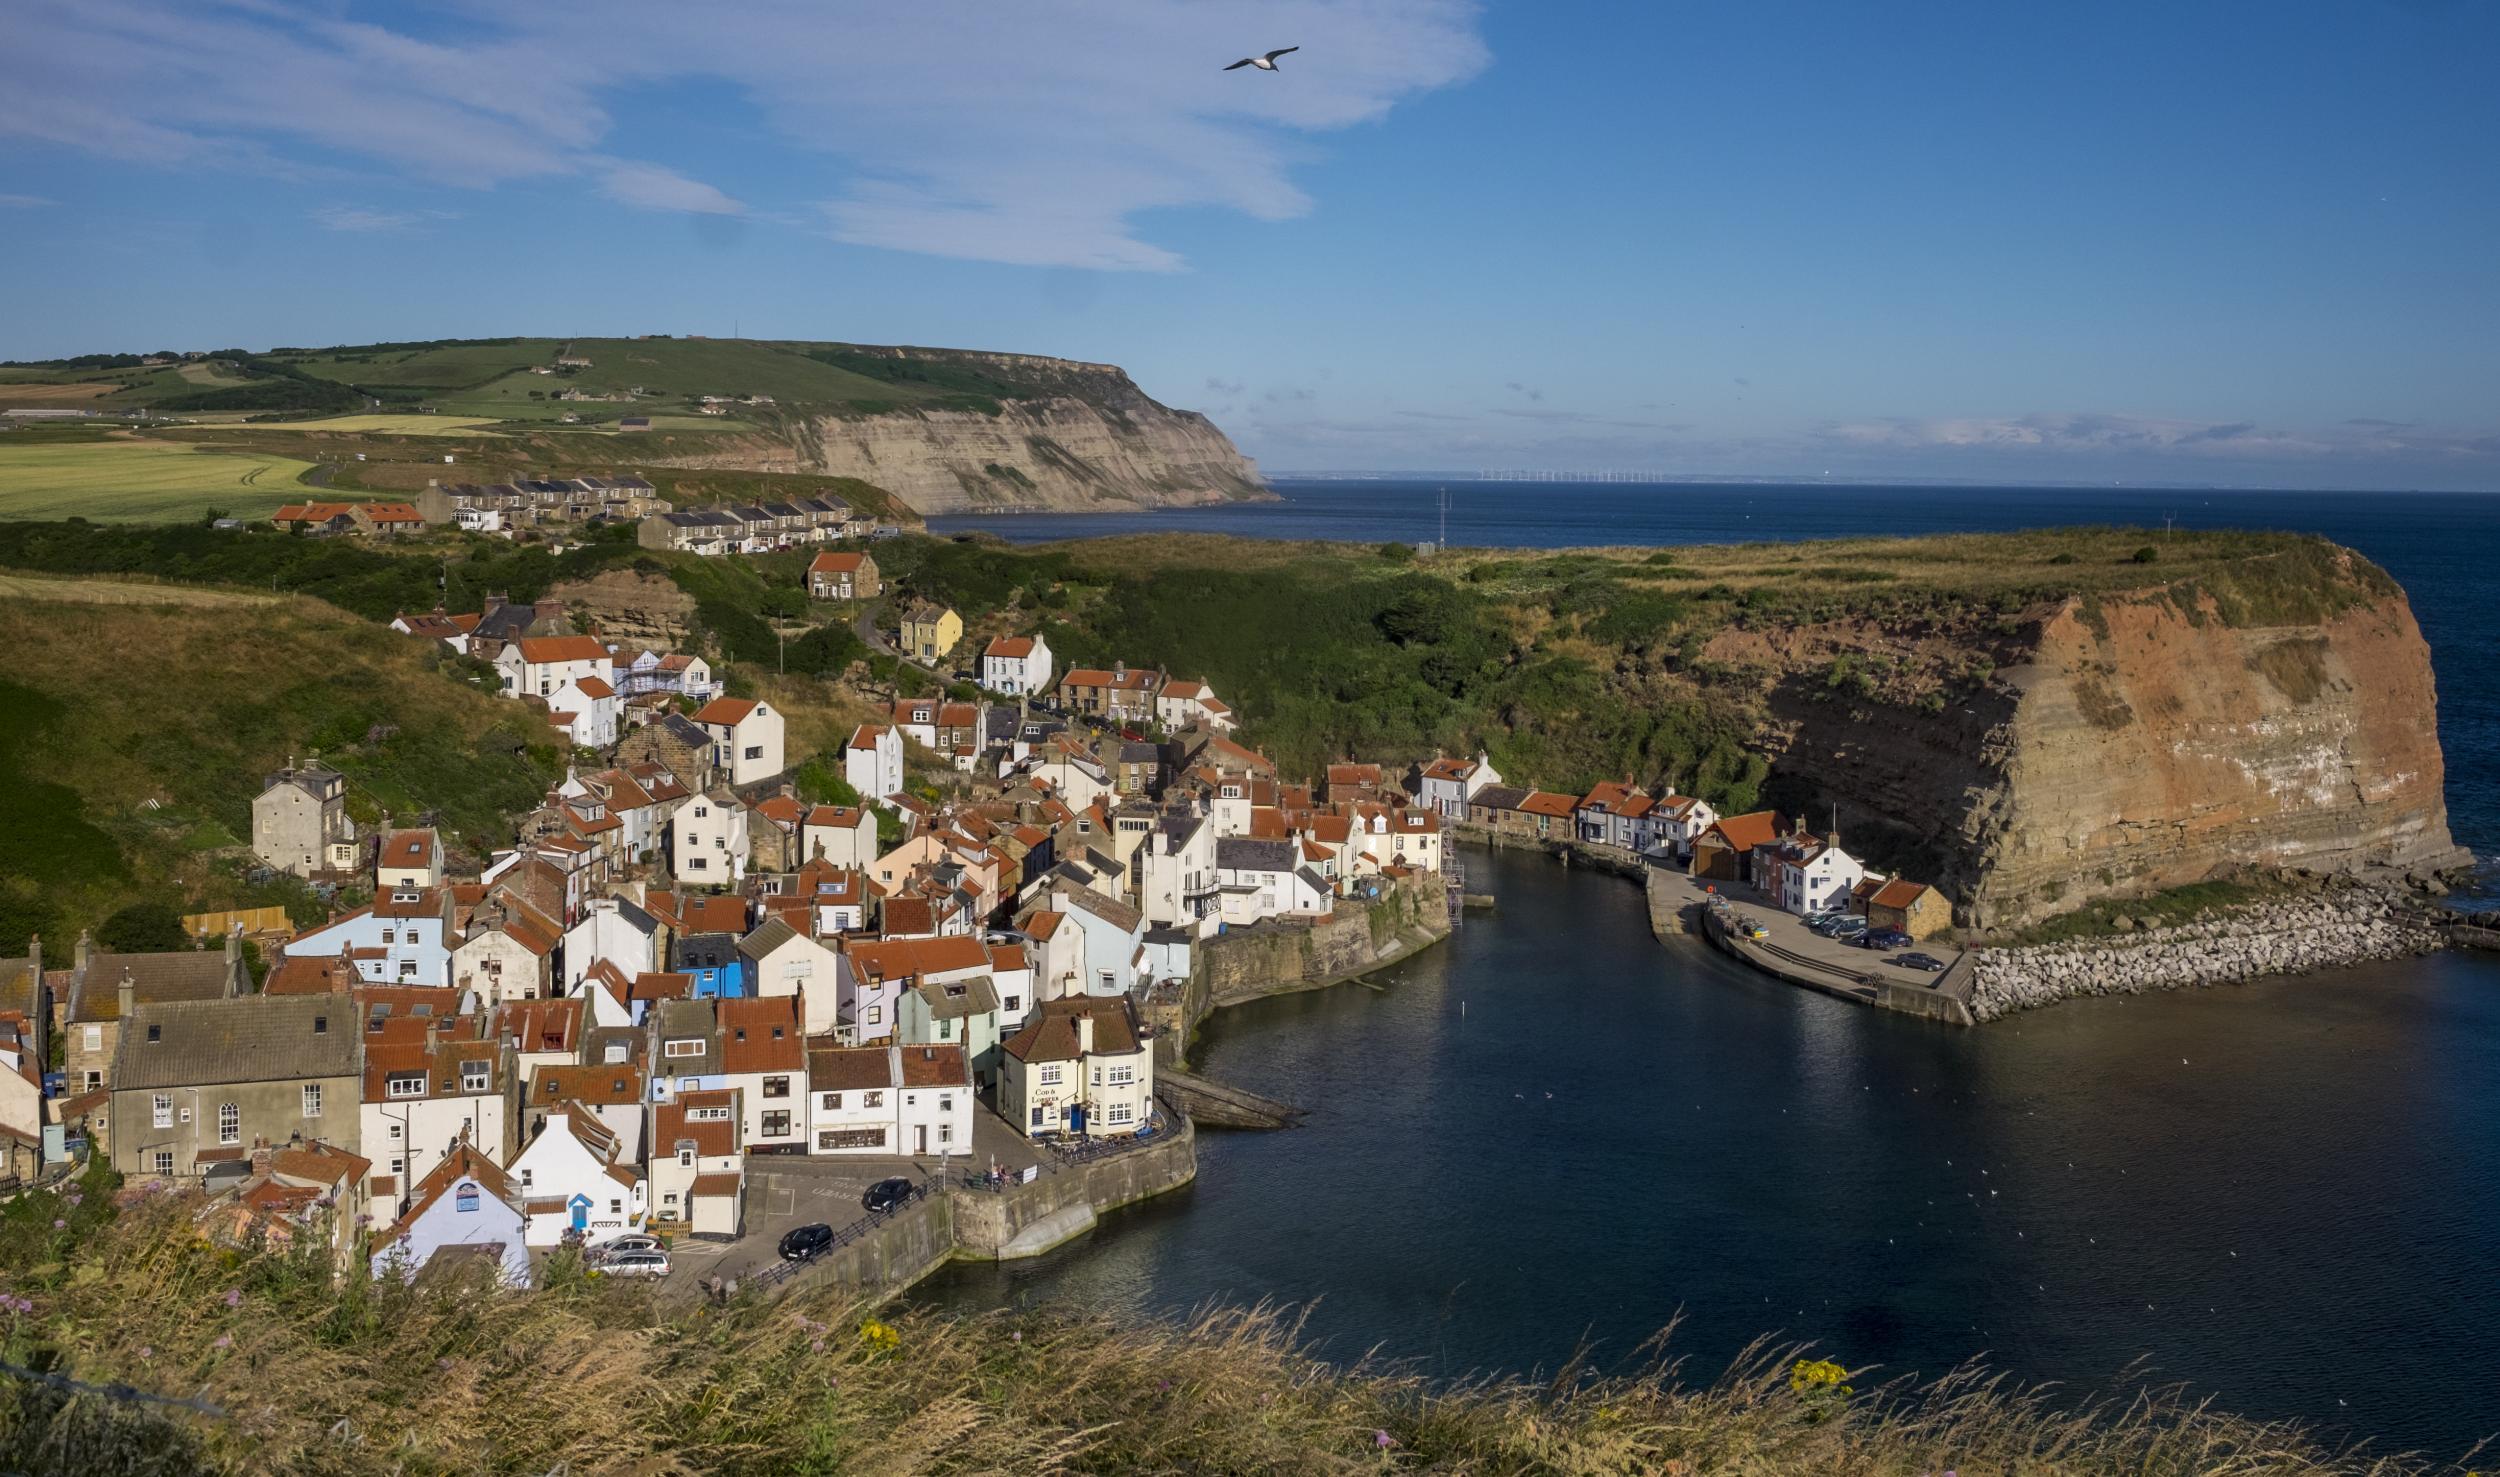 A new walking route as part of the England Coast Path project gives walkers access to the headland at Staithes